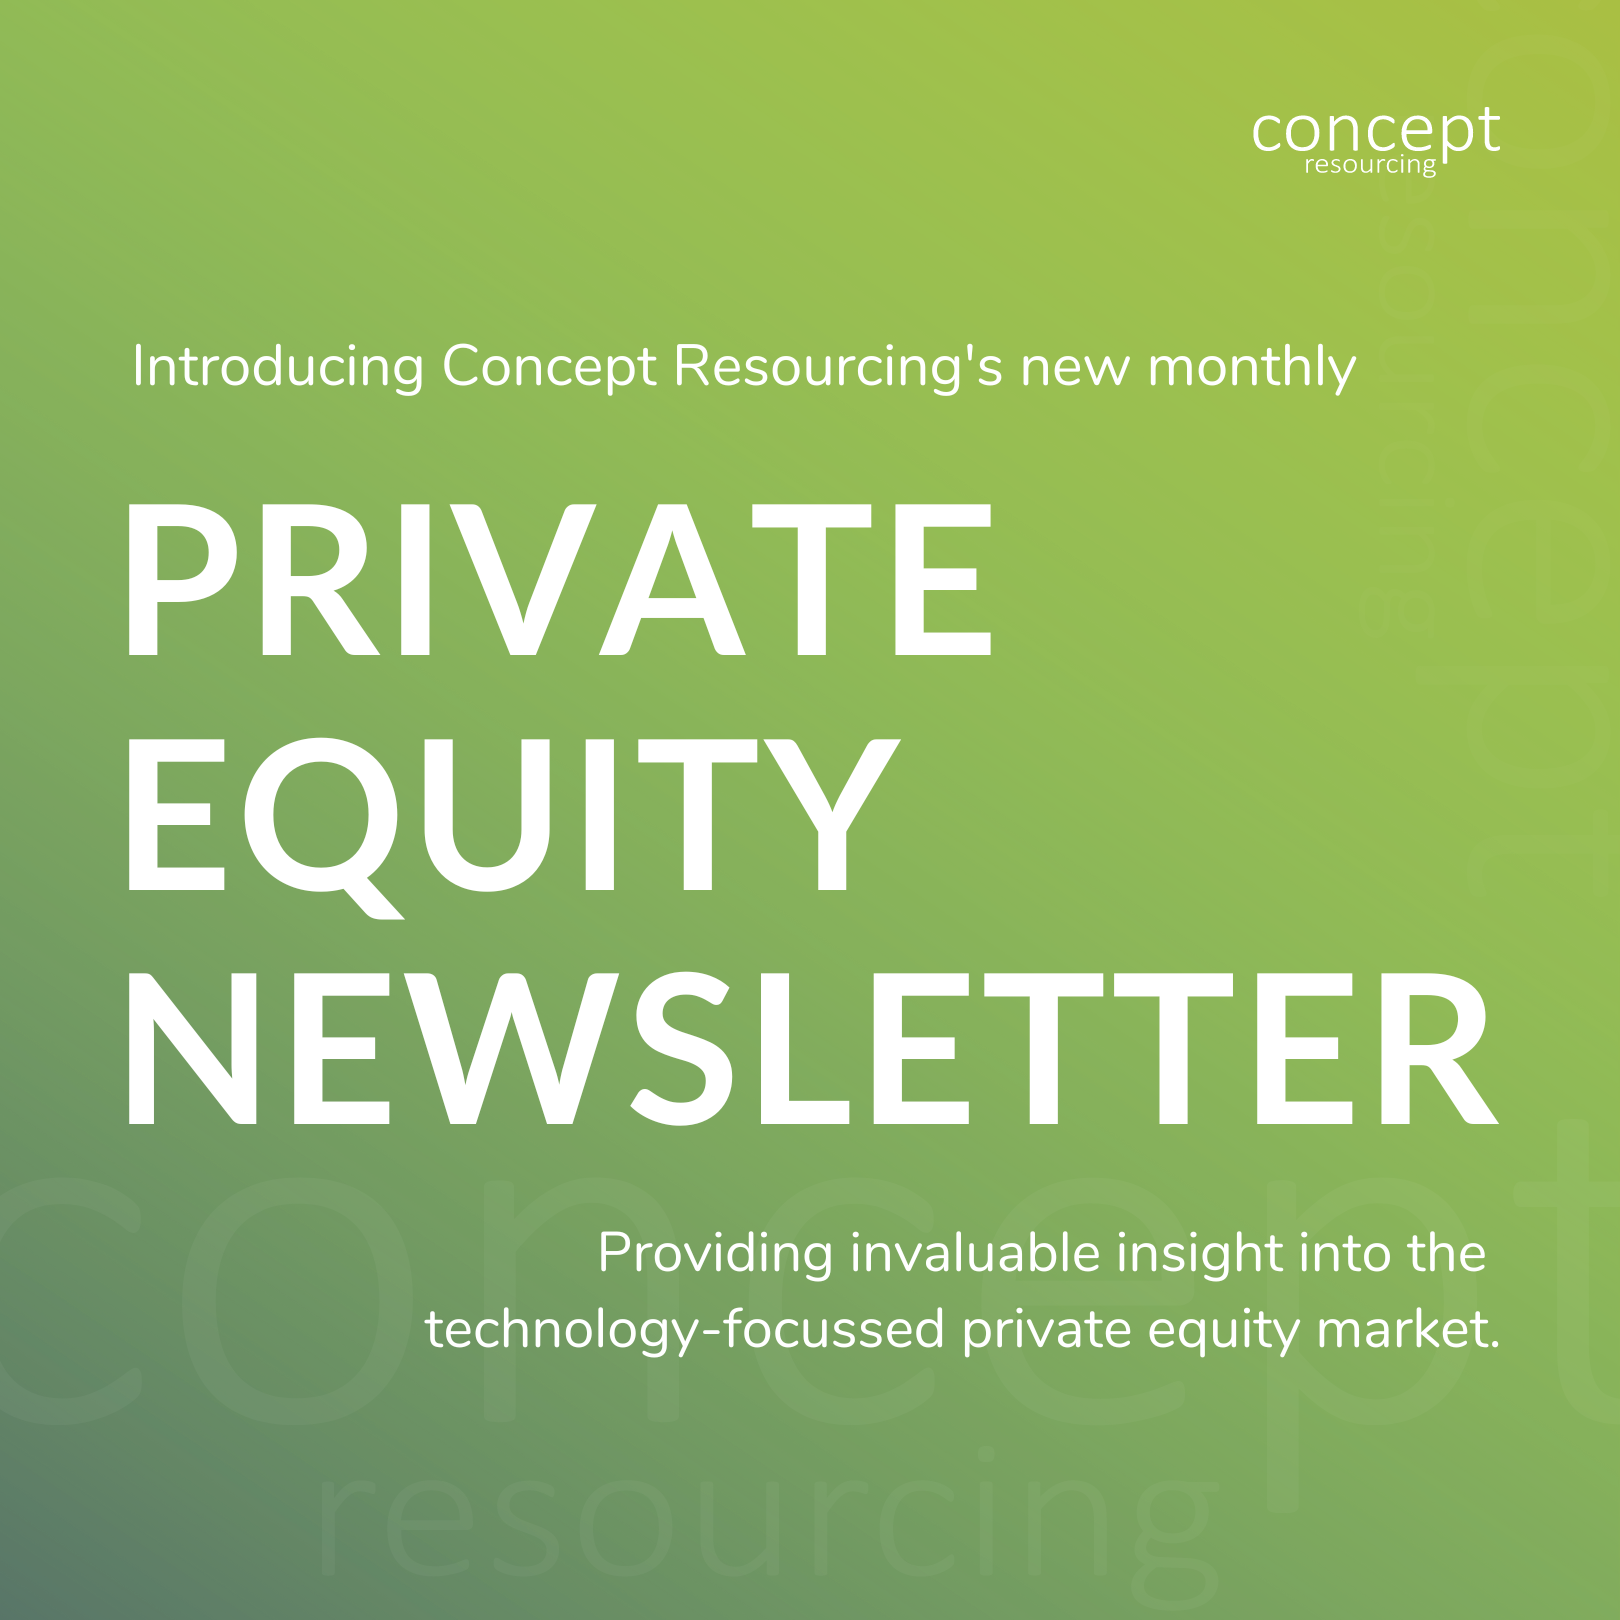 Concepts New Technology focussed Private Equity Newsletter